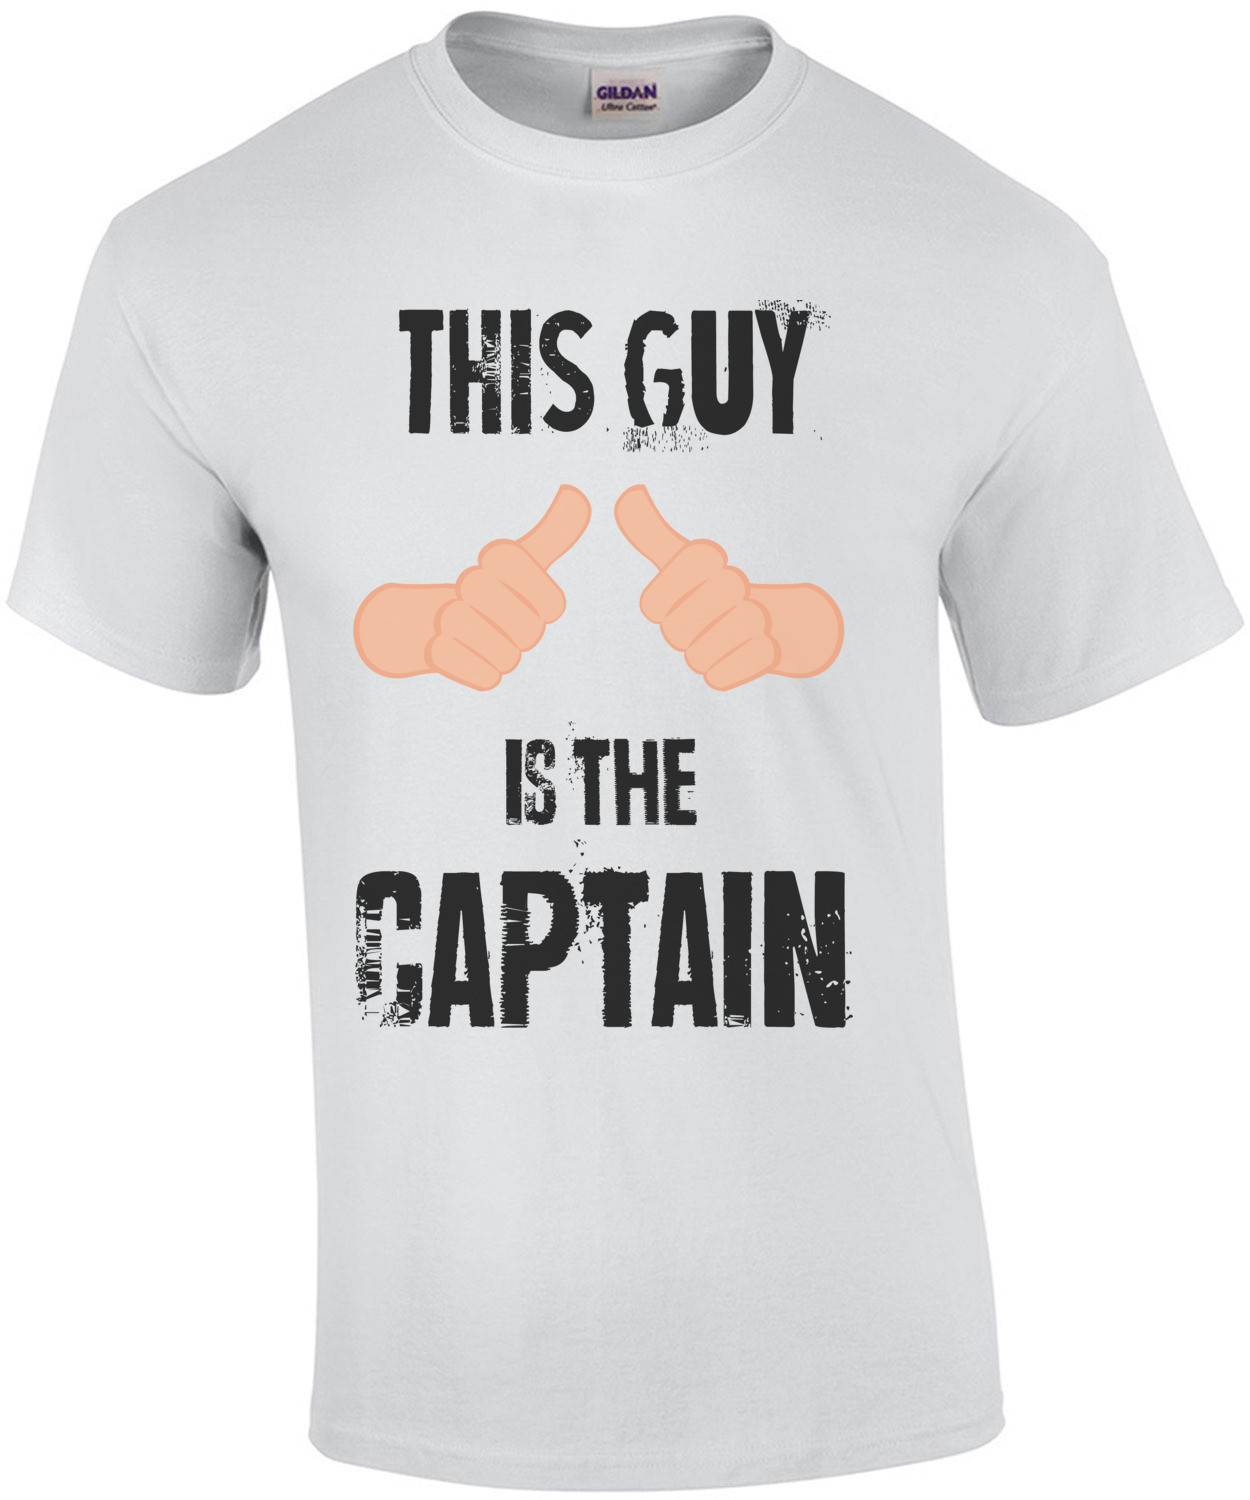 This guy is the captain. Funny Boating T-Shirt